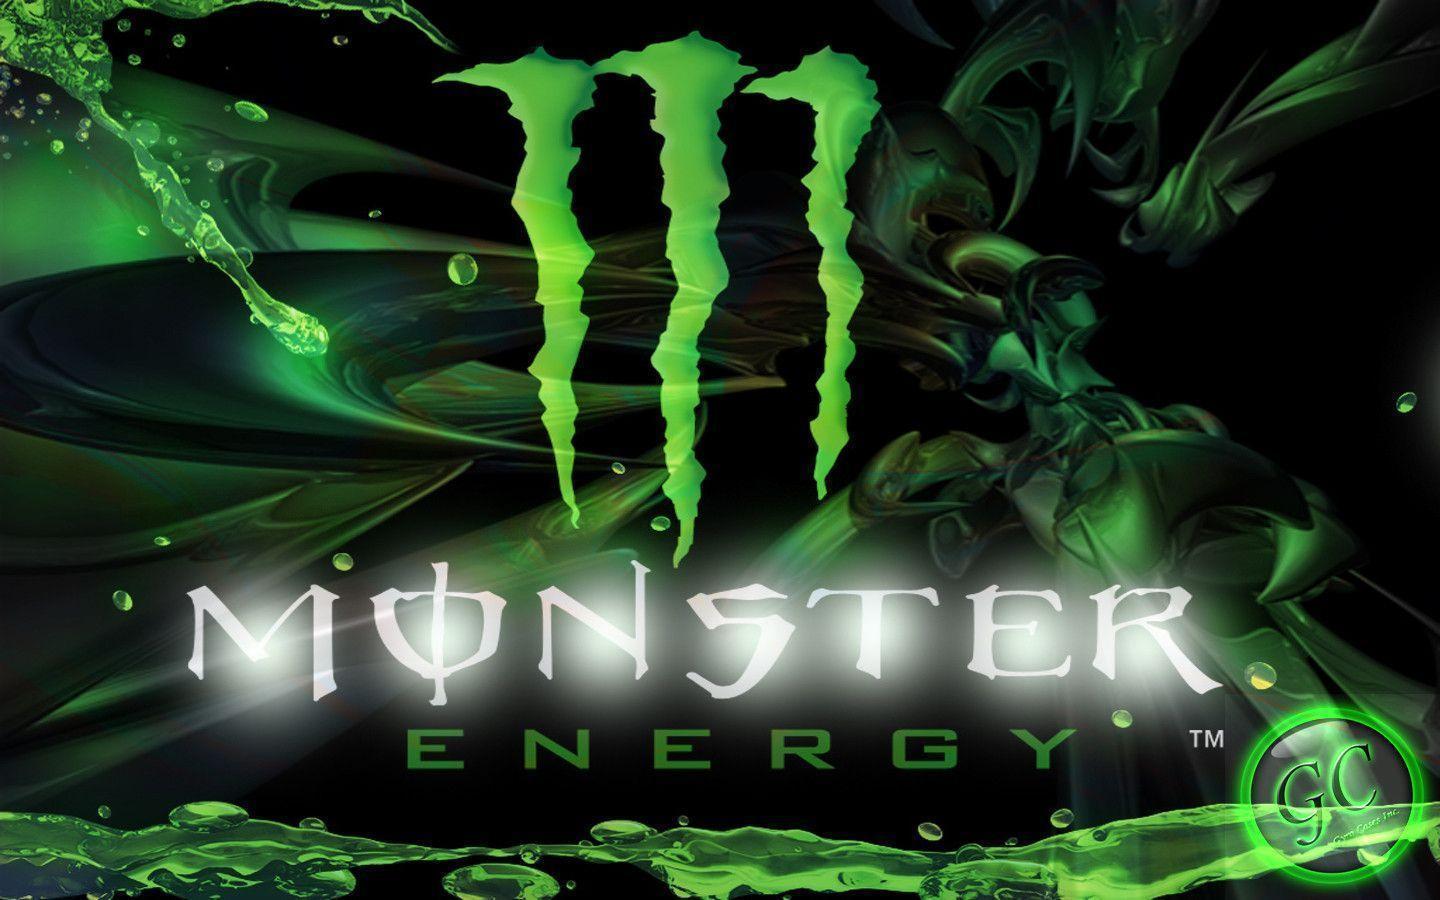 Amazing Monster Energy Drink Image HD Wallpapers Drink